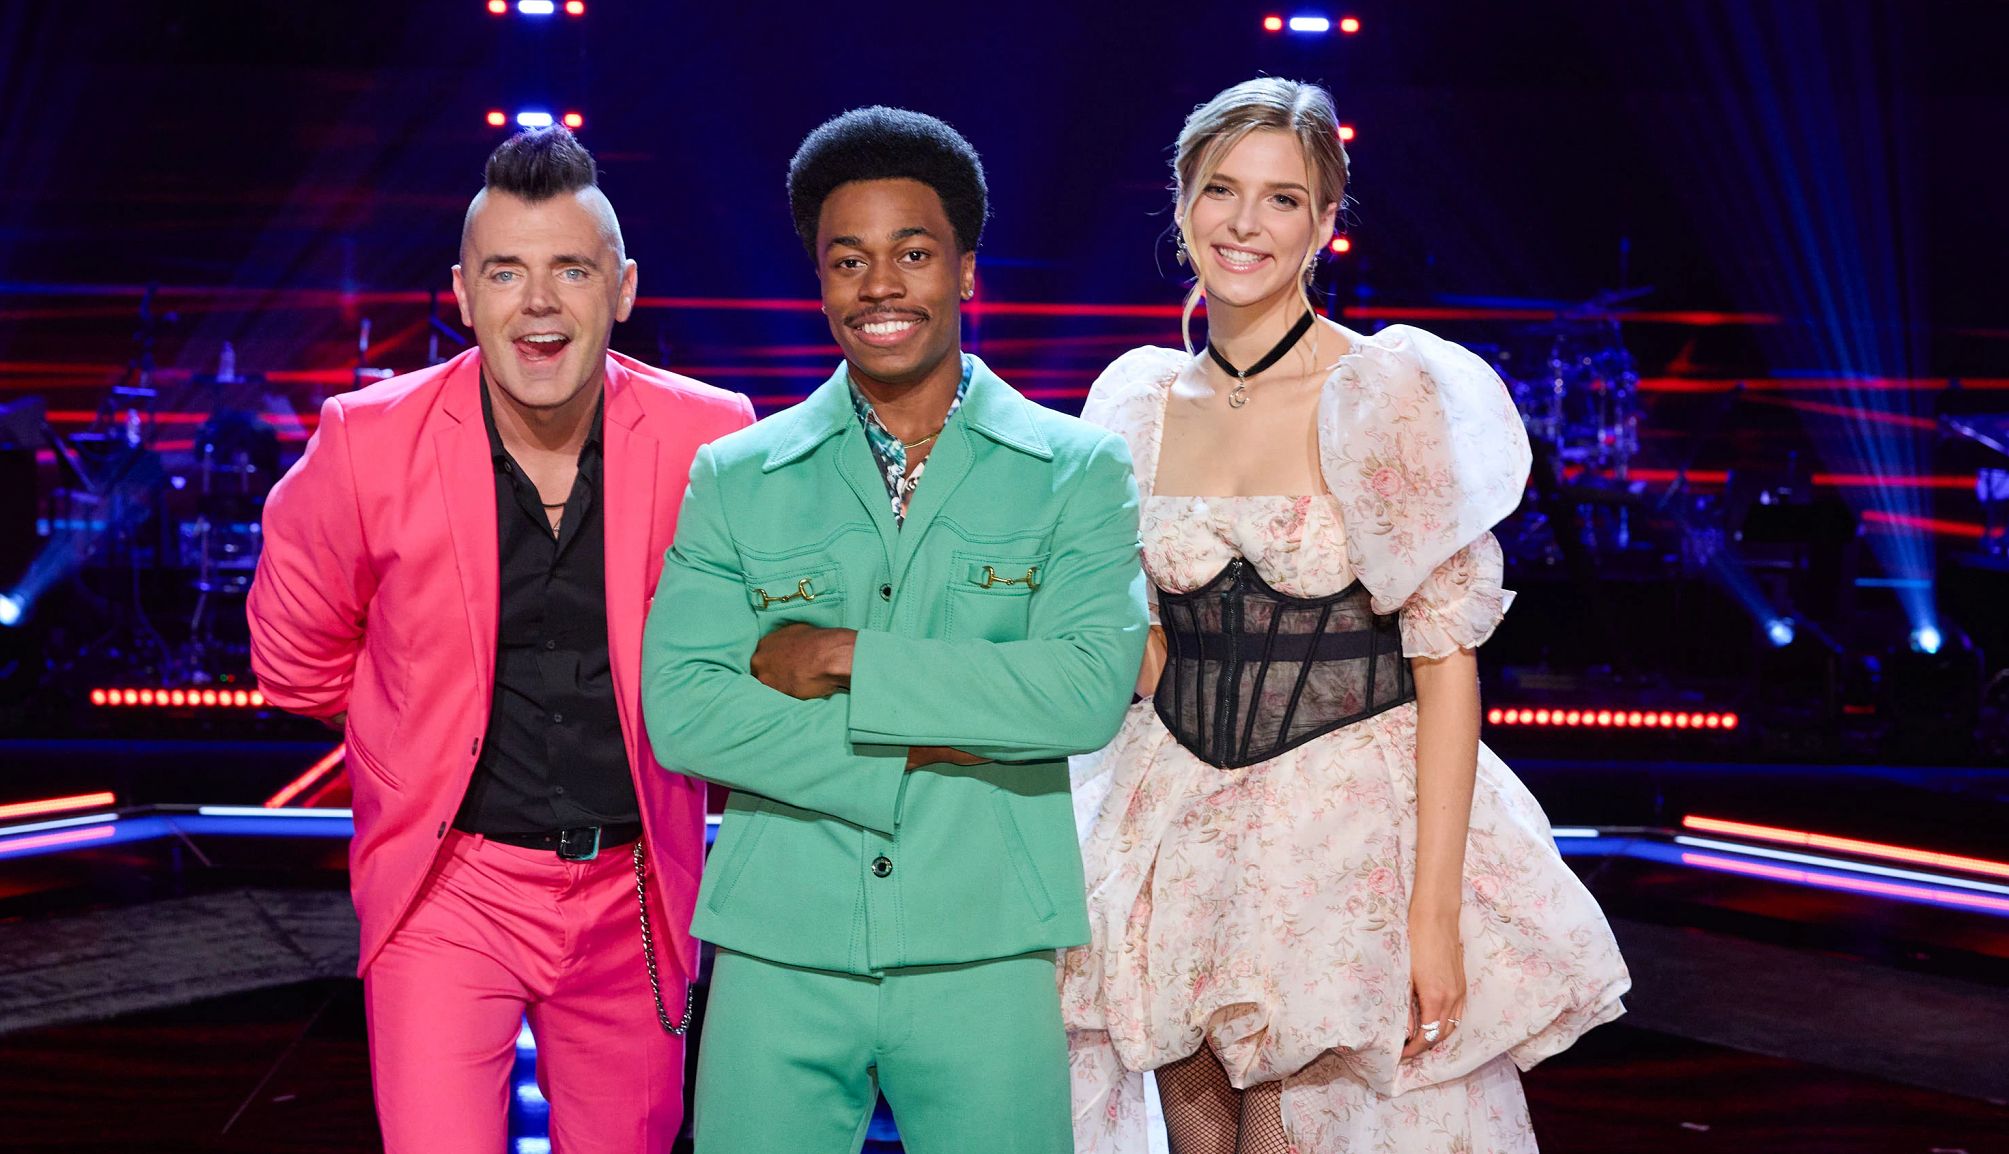 The Voice contestants Bryan Olesen, Nathan Chester and Zoe Levert standing together onstage